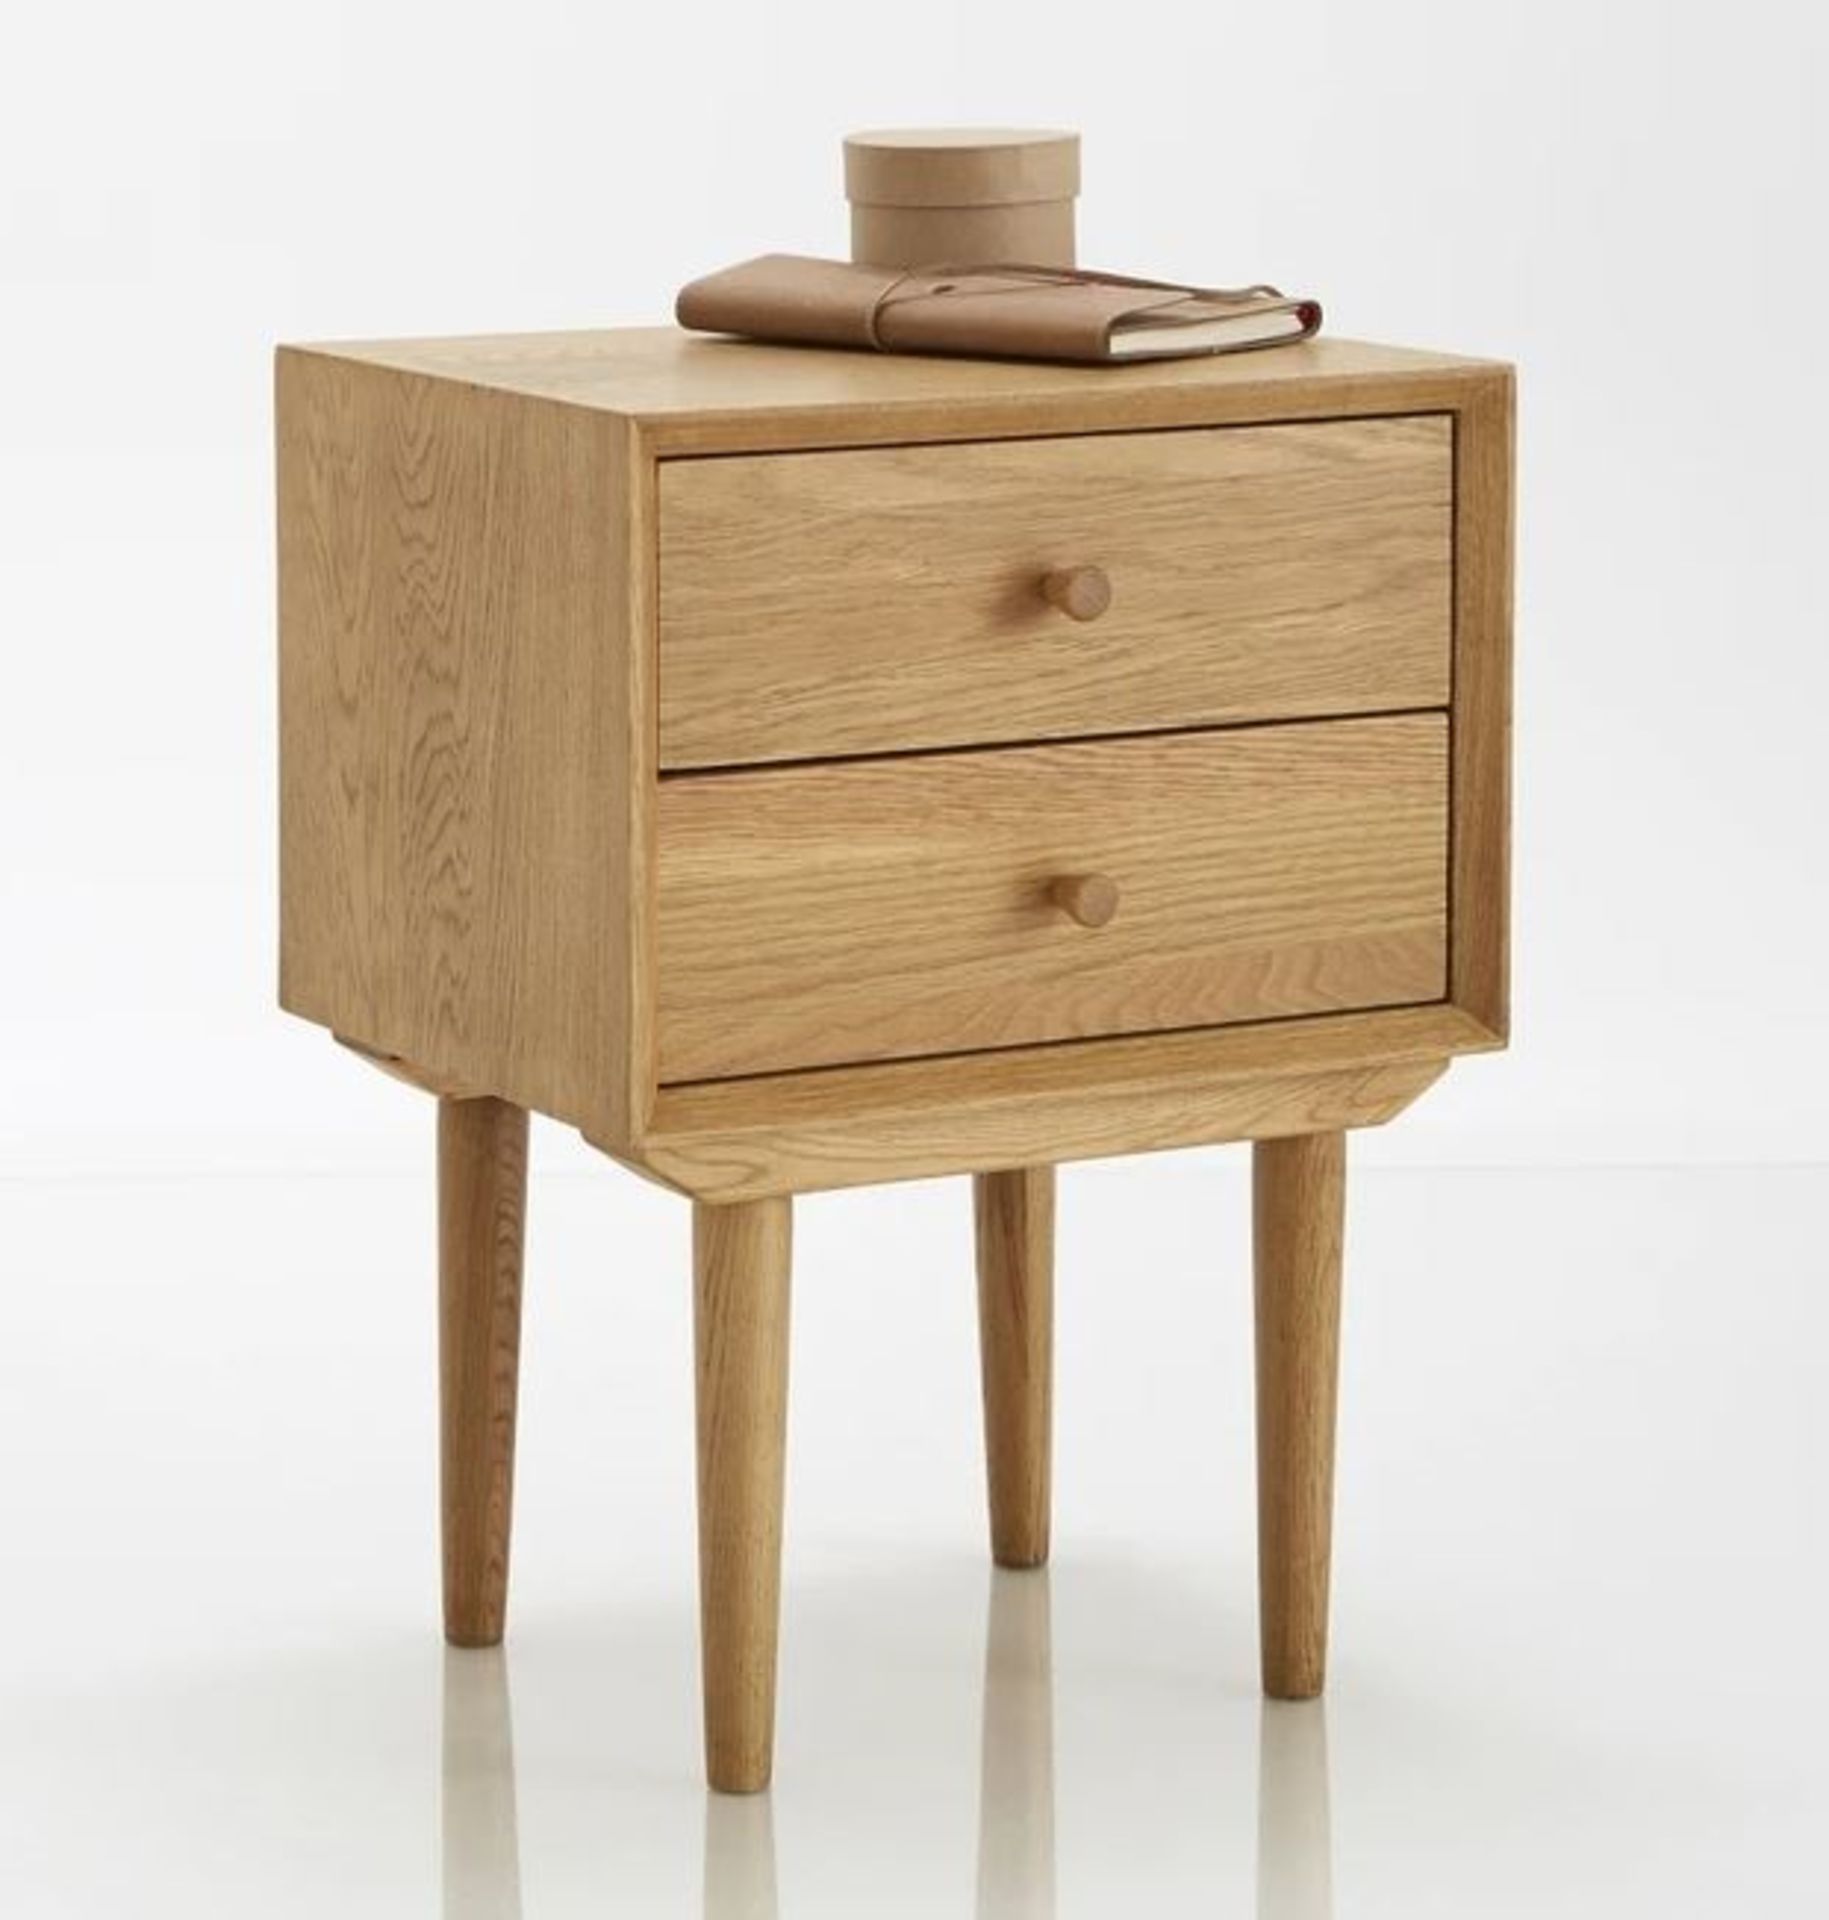 LA REDOUTE QUILDA 2 DRAWER RETRO BEDSIDE TABLE